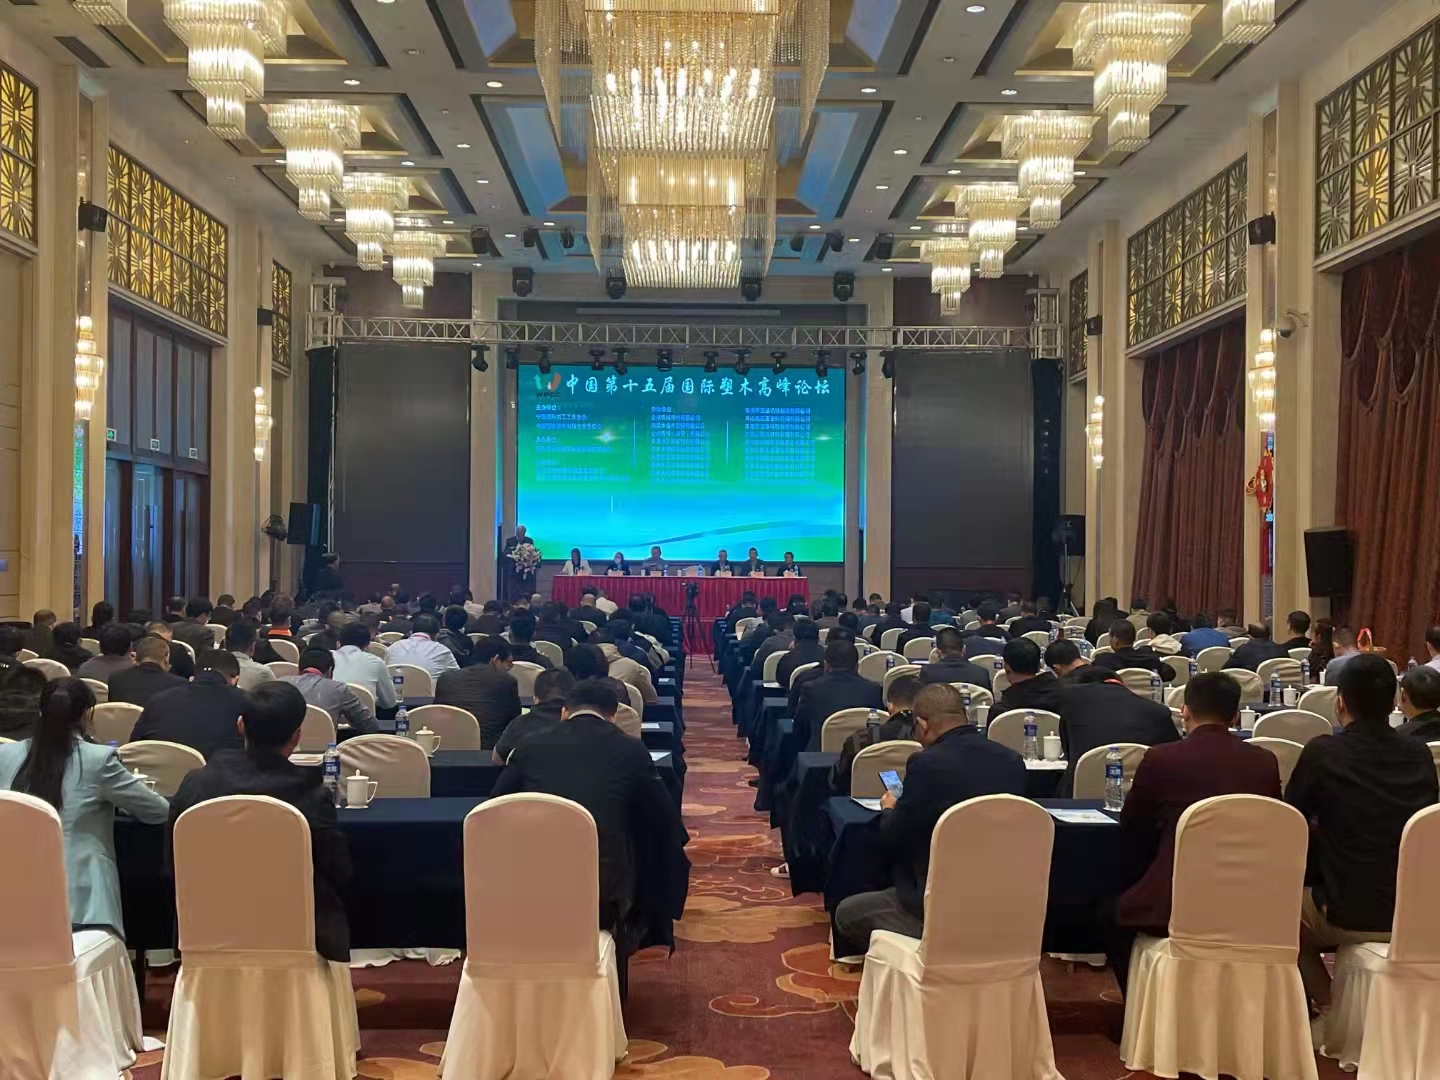 Macrotech was invited to attend the 15th International Plastic Wood Summit Forum in China